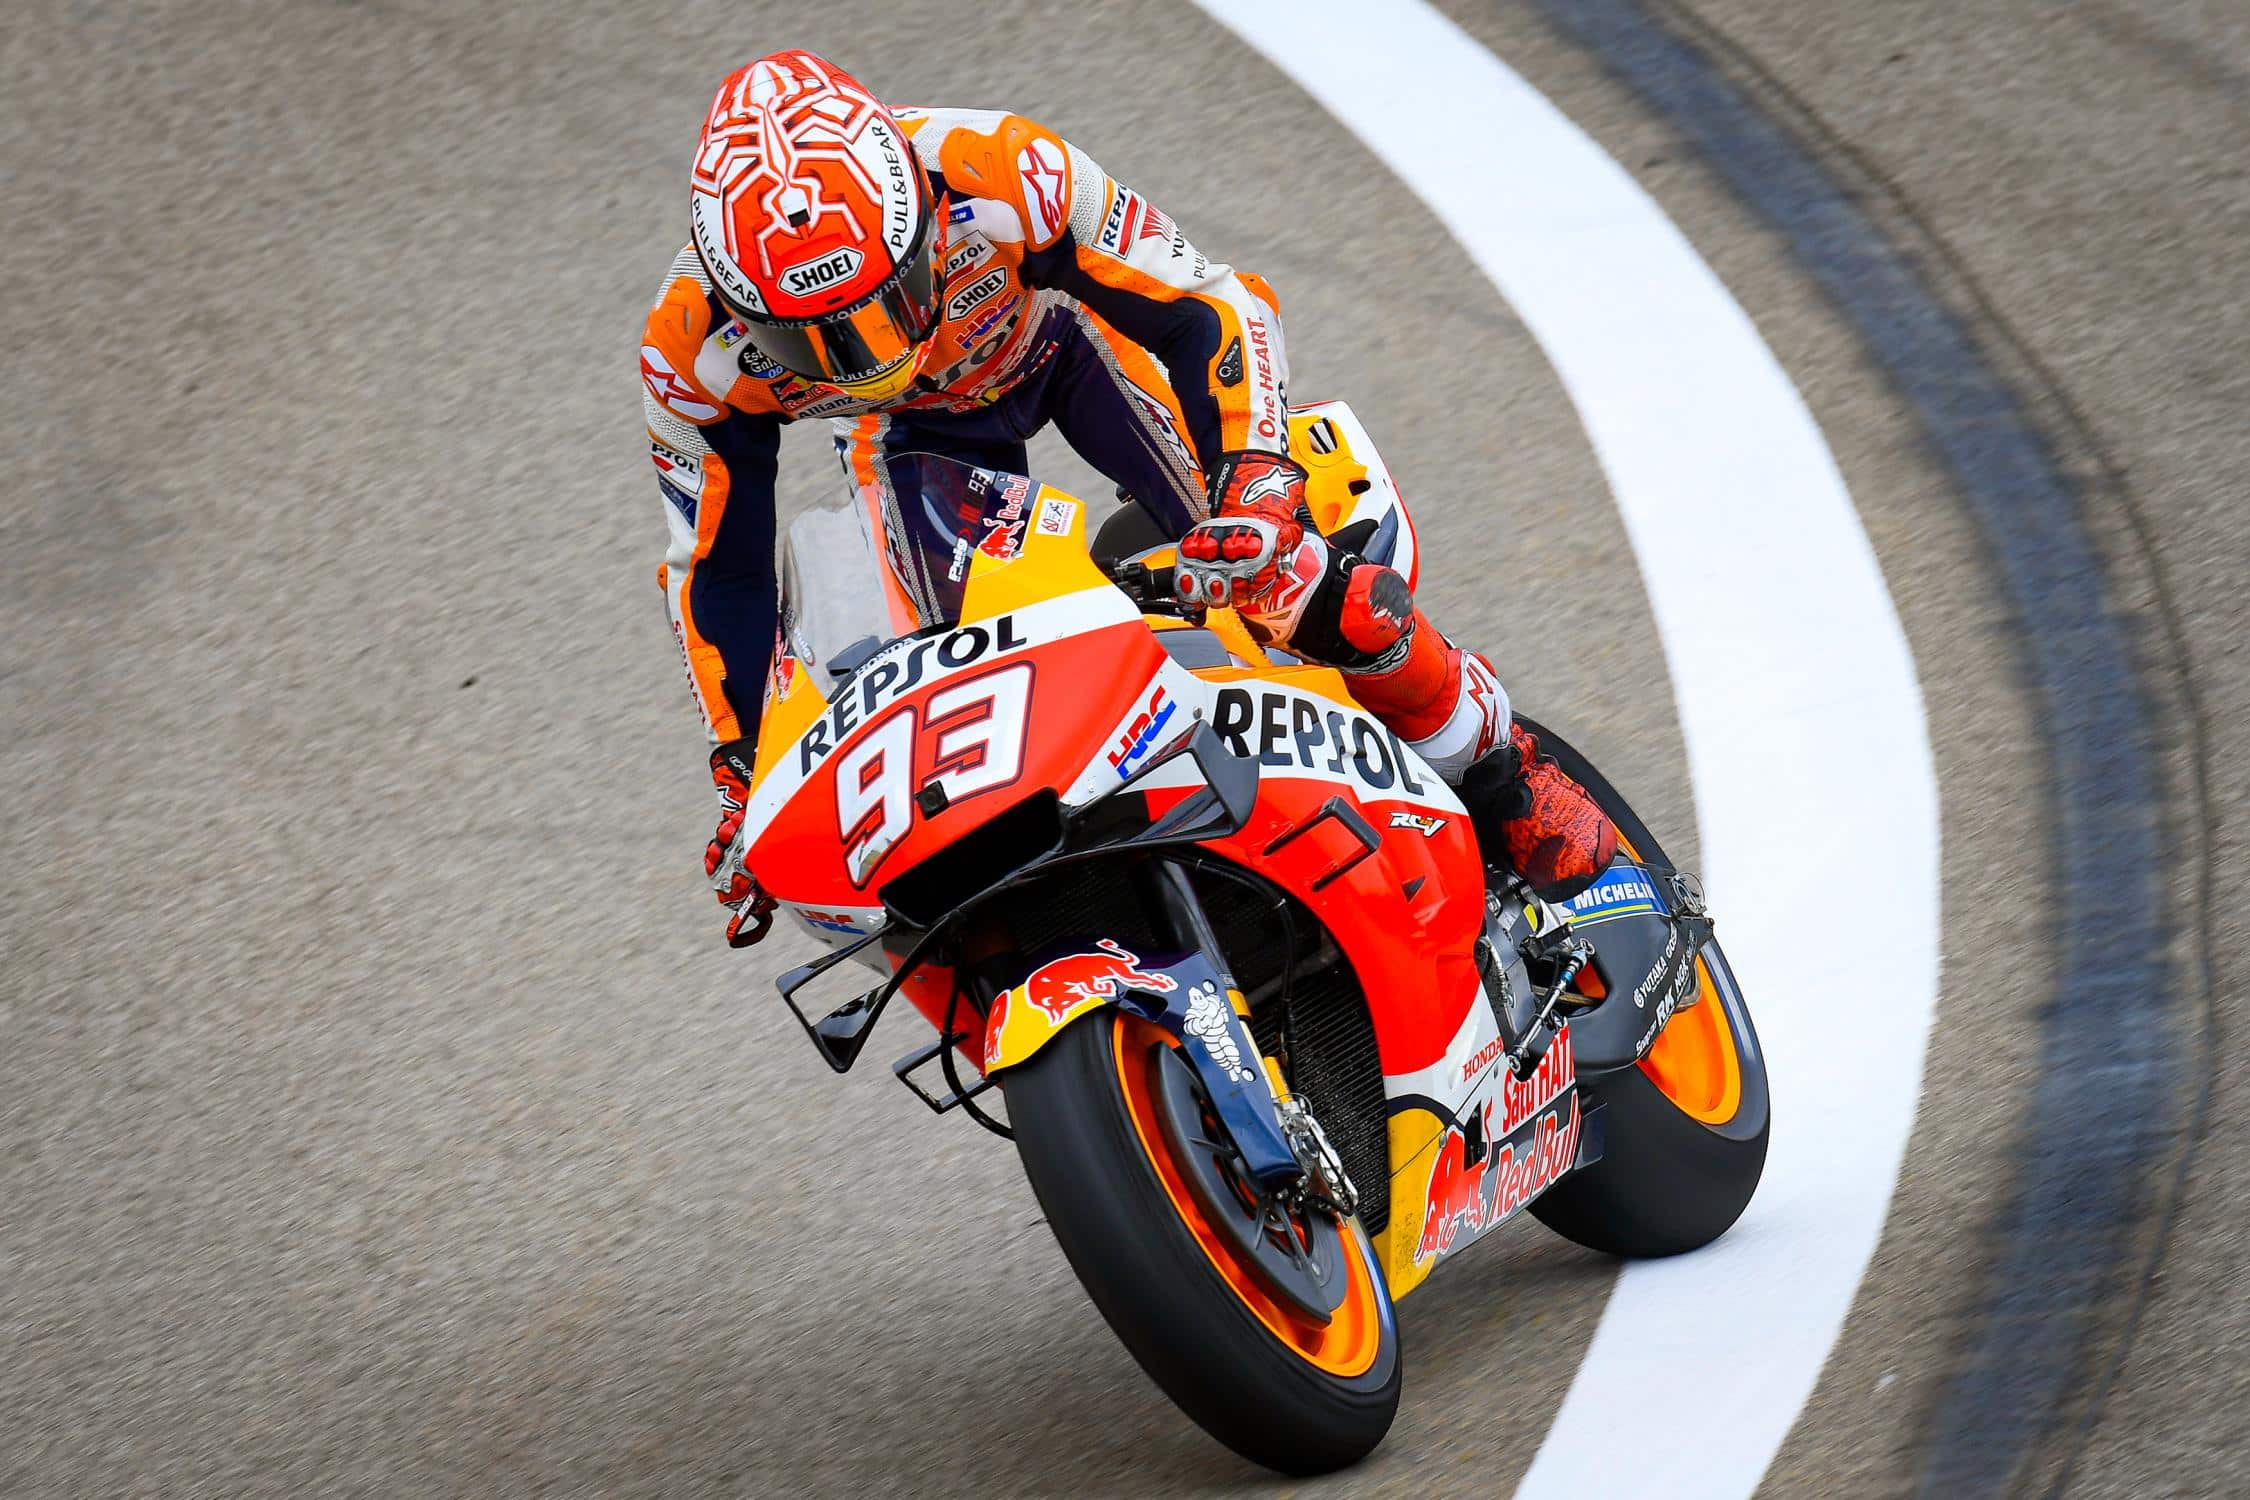 Grand Prix of the Czech Republic Brno MotoGP Race: Márquez clean and flawless